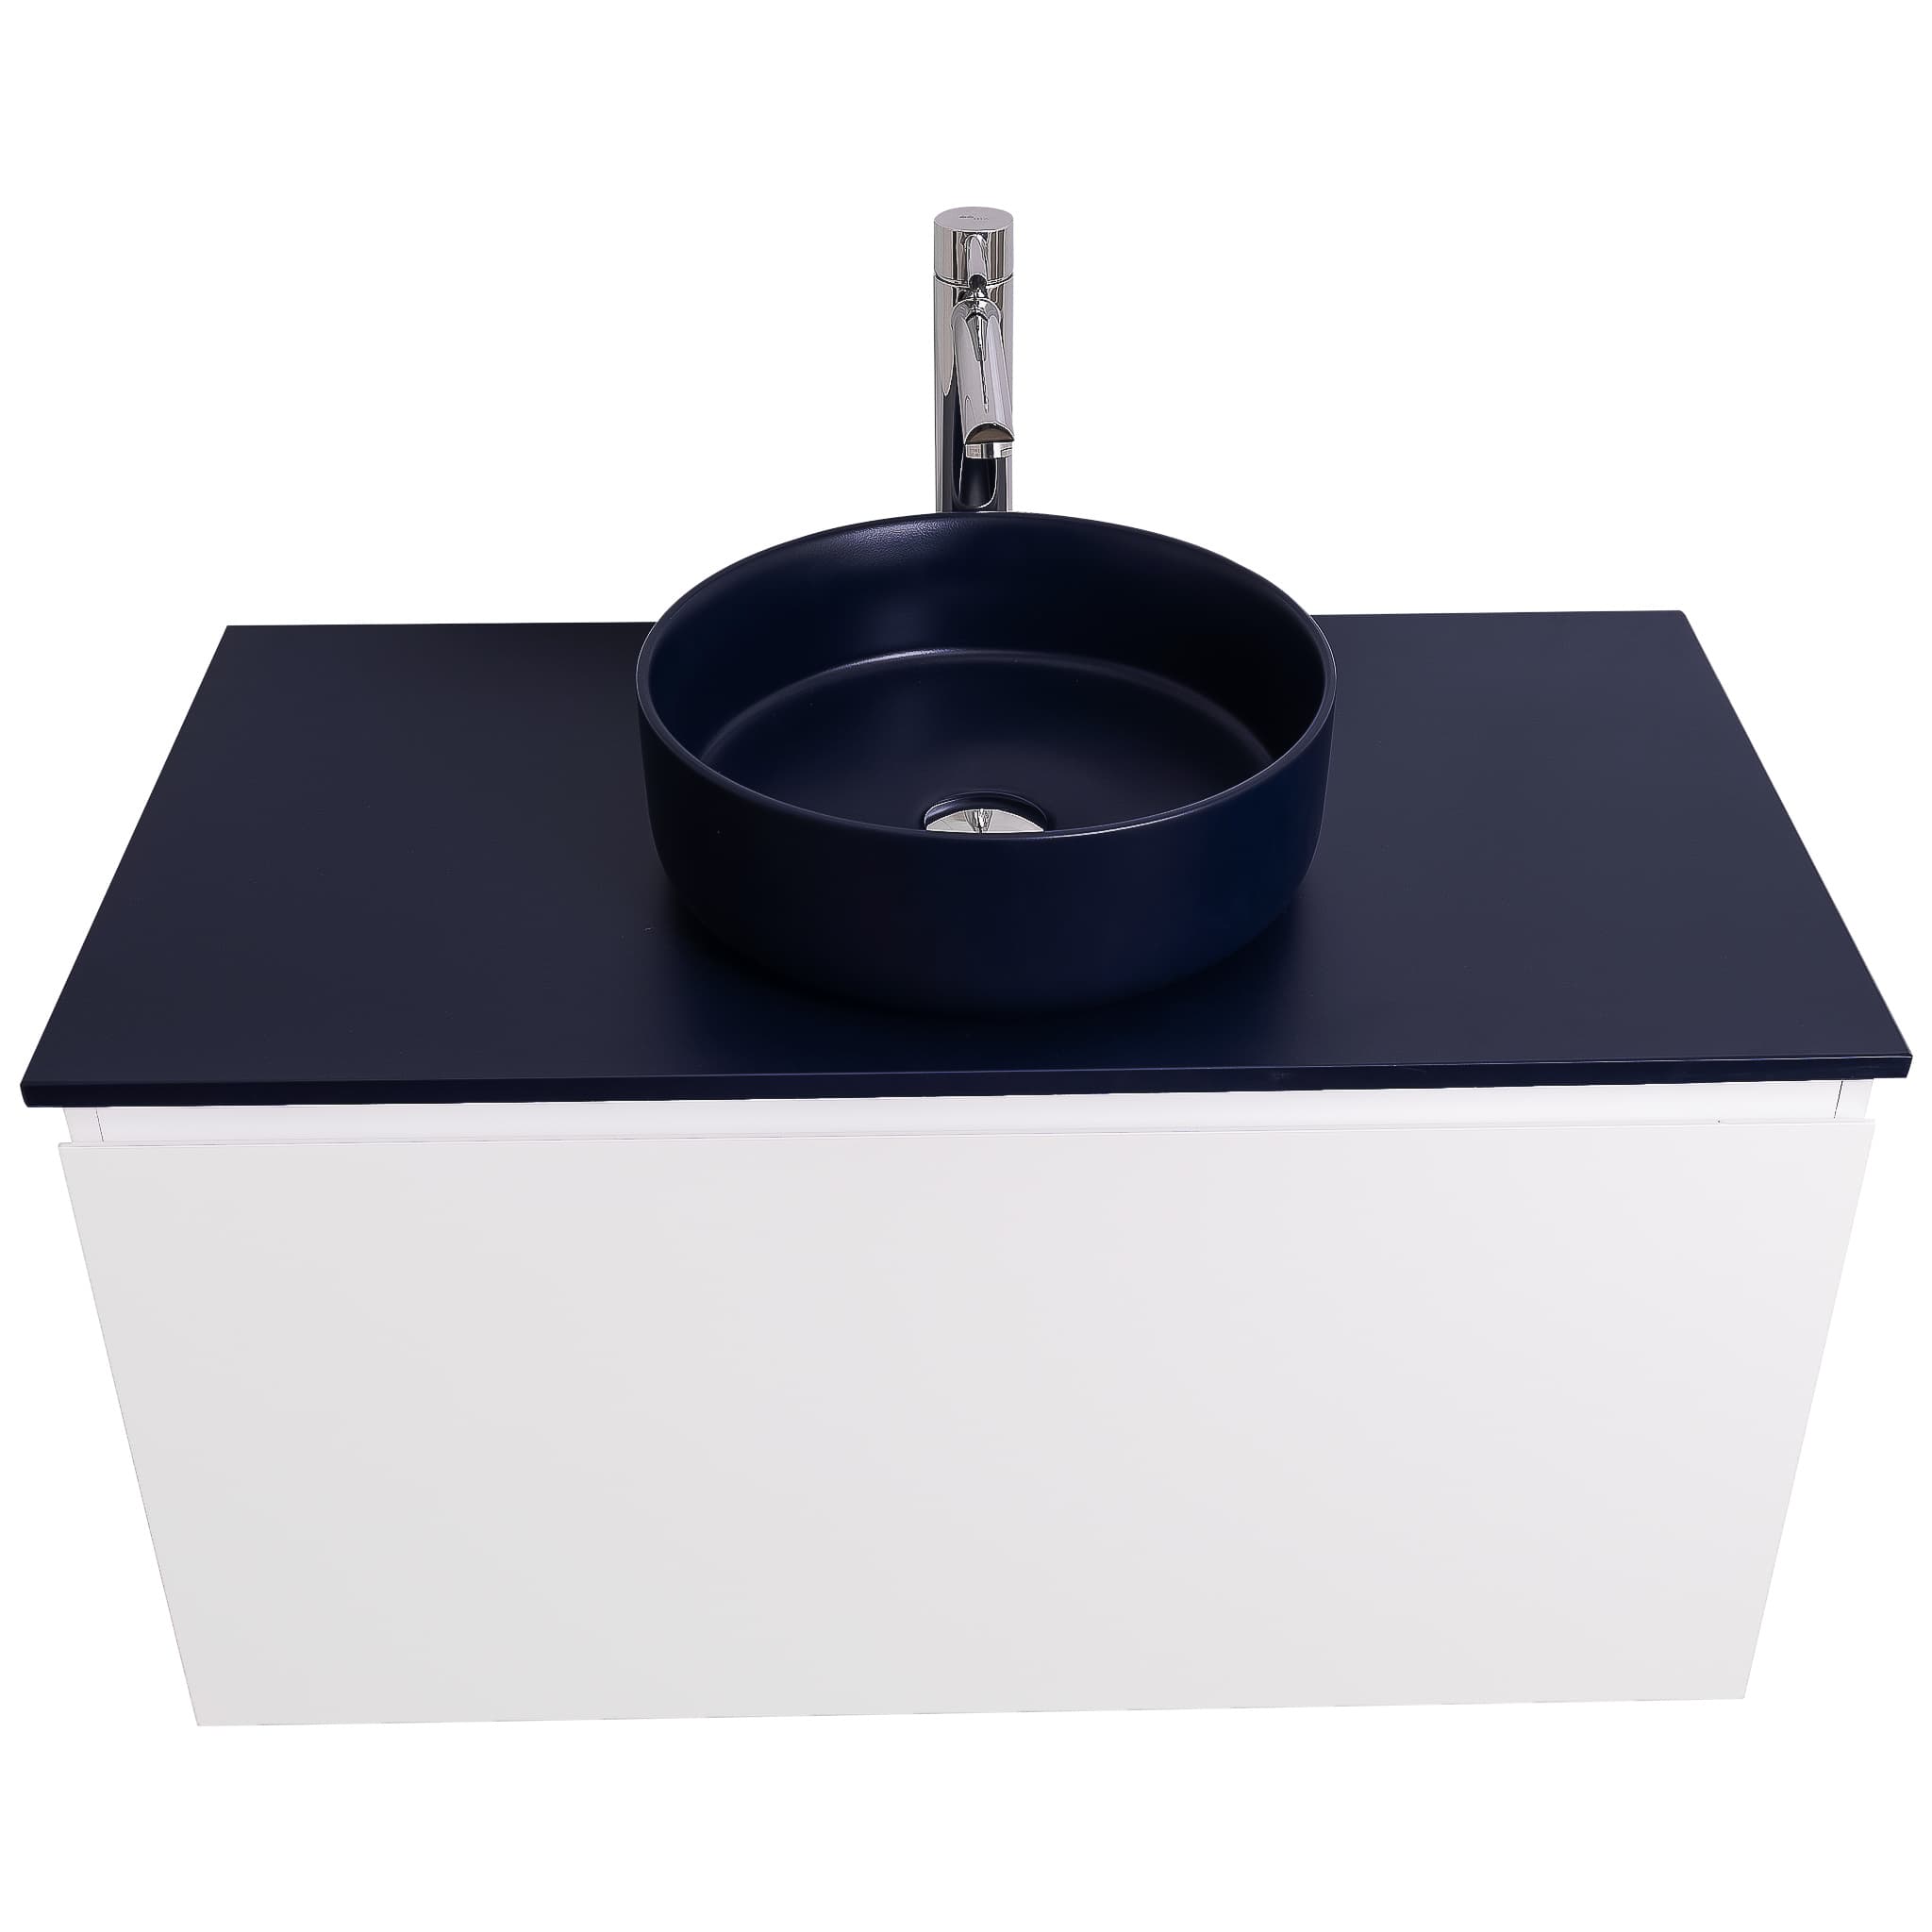 Venice 39.5 White High Gloss Cabinet, Ares Navy Blue Top And Ares Navy Blue Ceramic Basin, Wall Mounted Modern Vanity Set